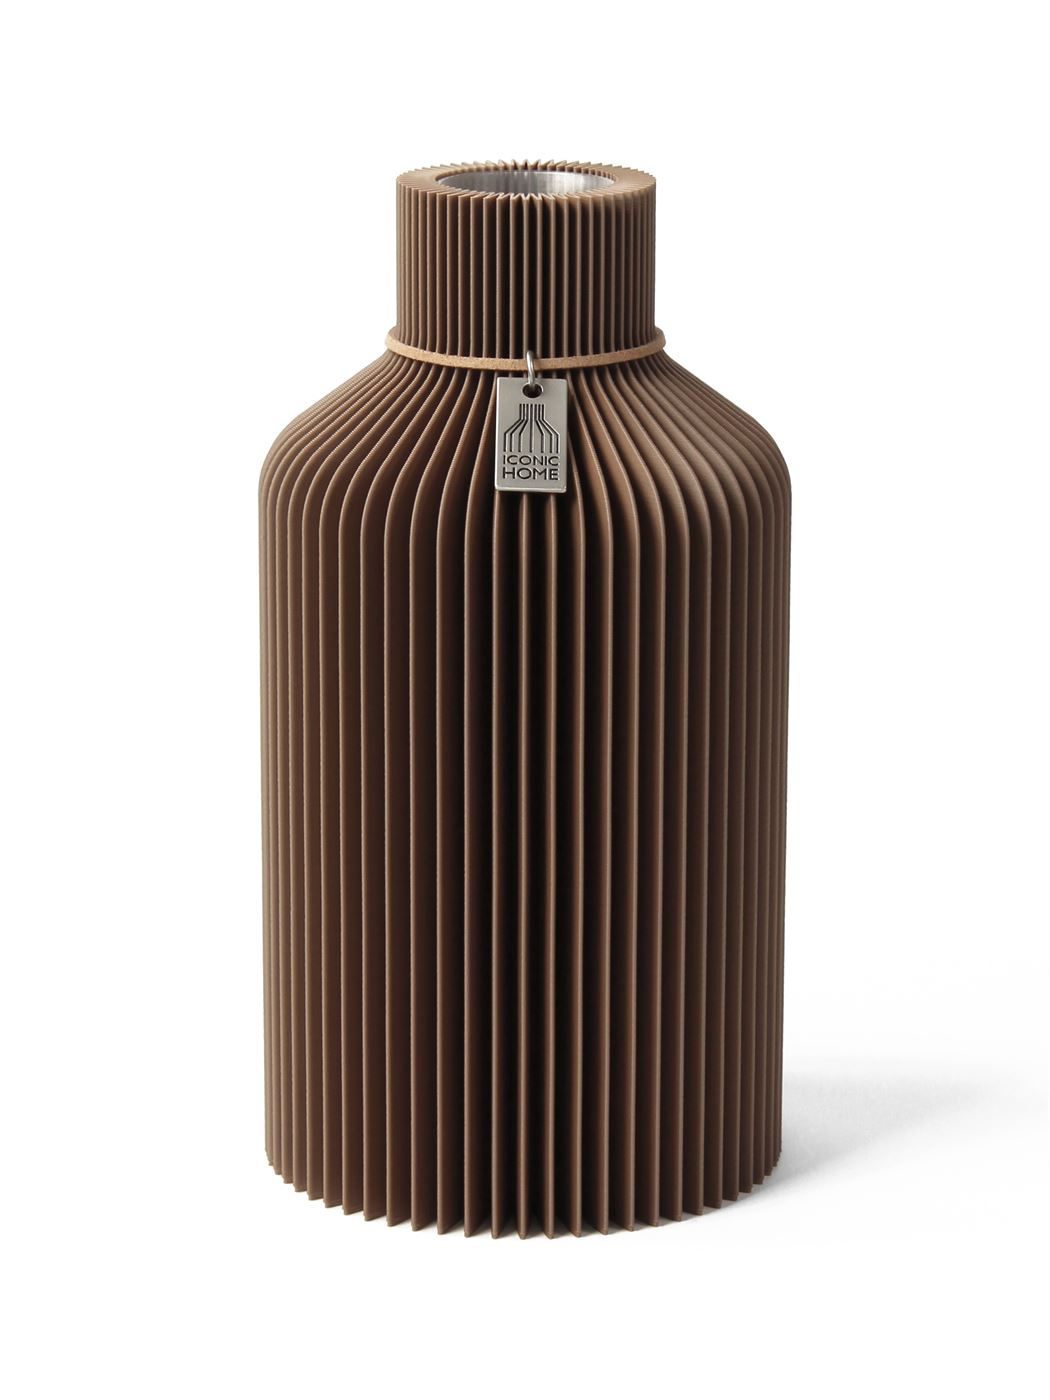 Vase Pure Choco Brown Small ICONIC HOME